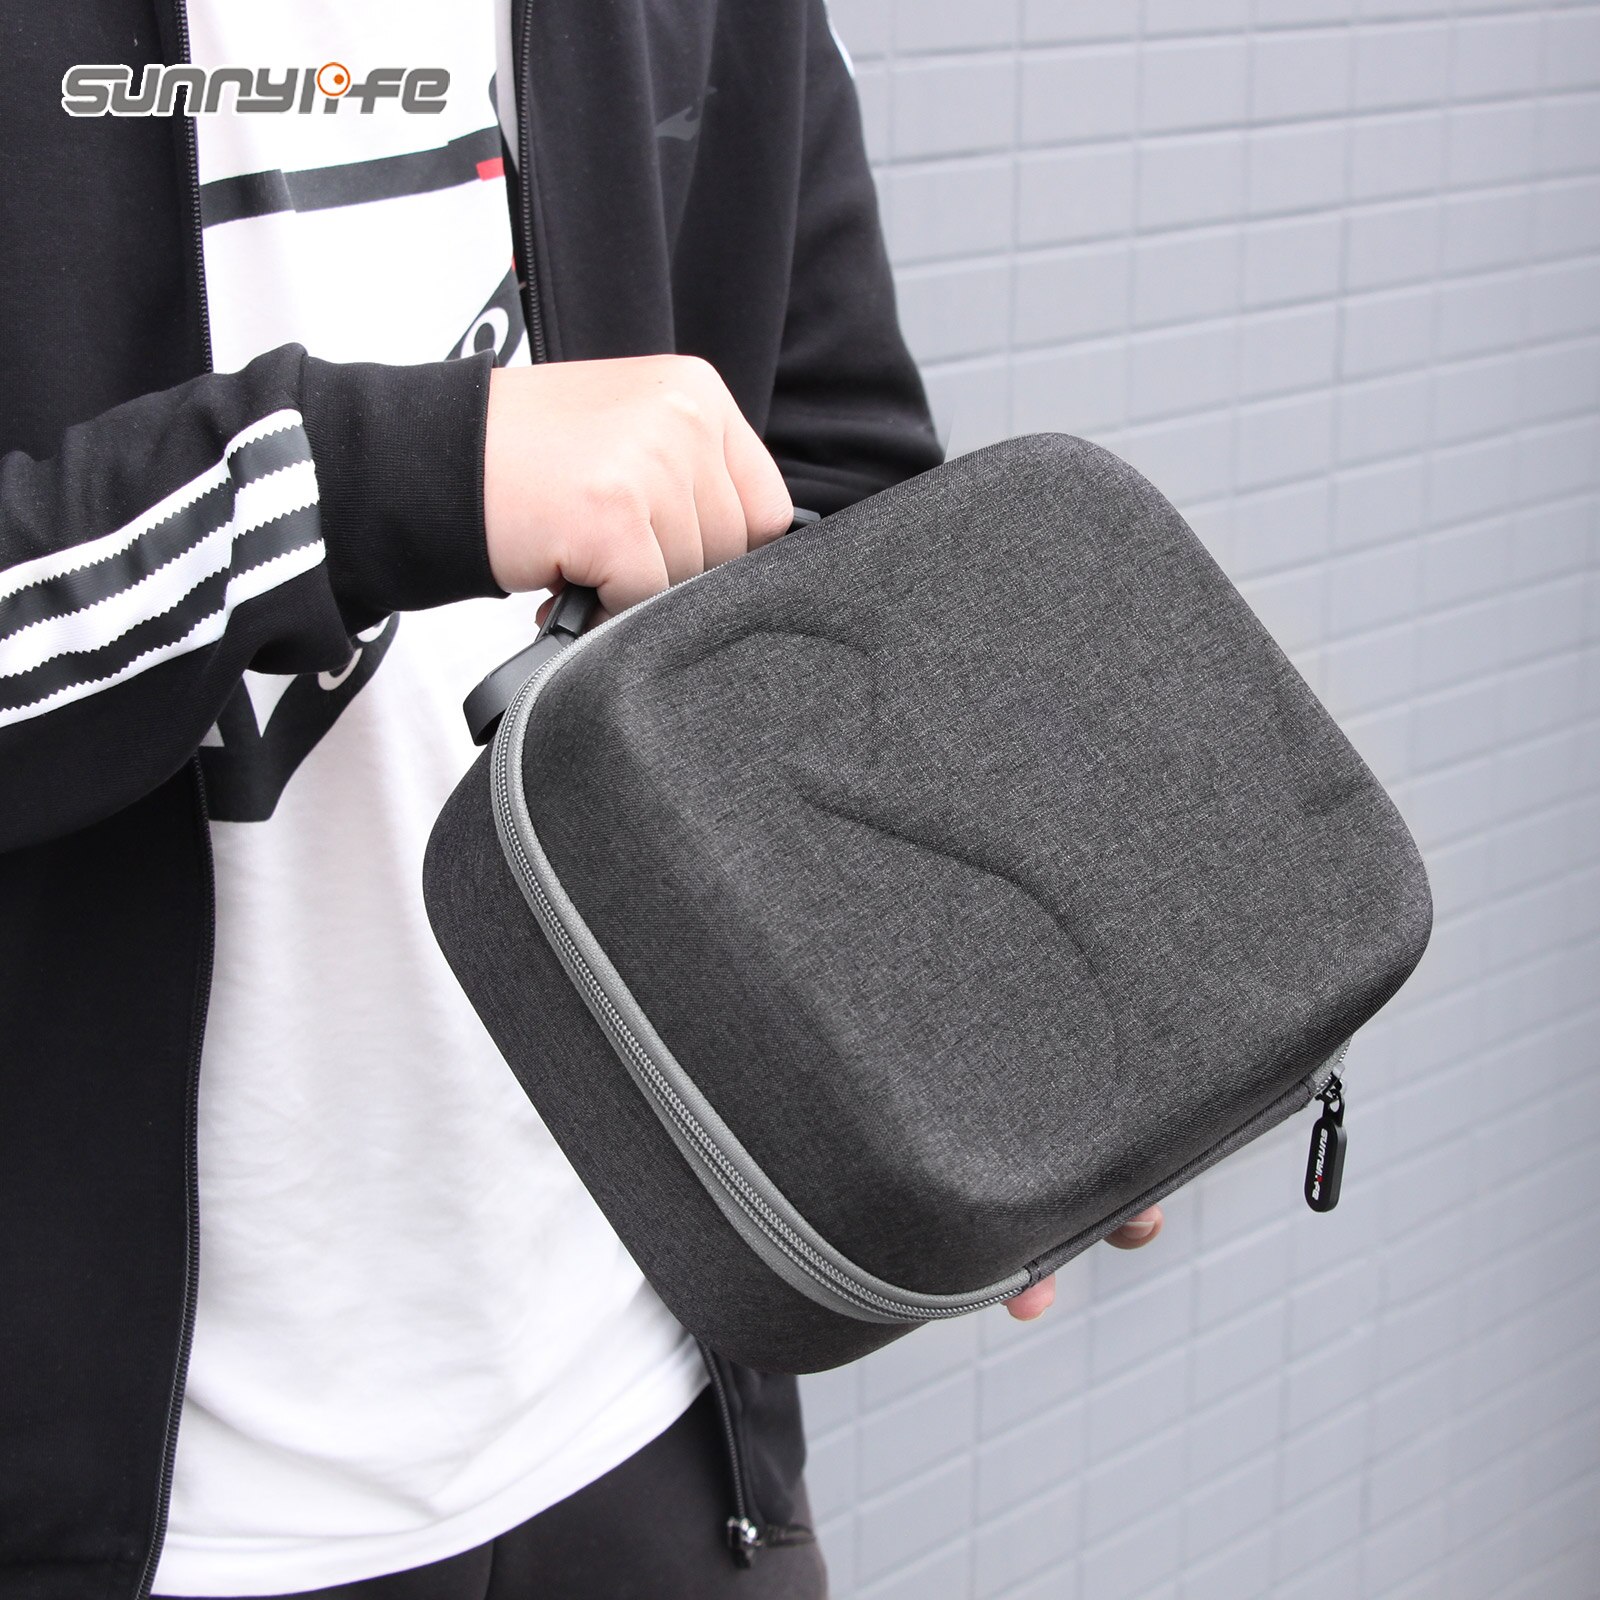 Sunnylife Carrying Case Accessories for DJI FPV Goggles V2 Mini 